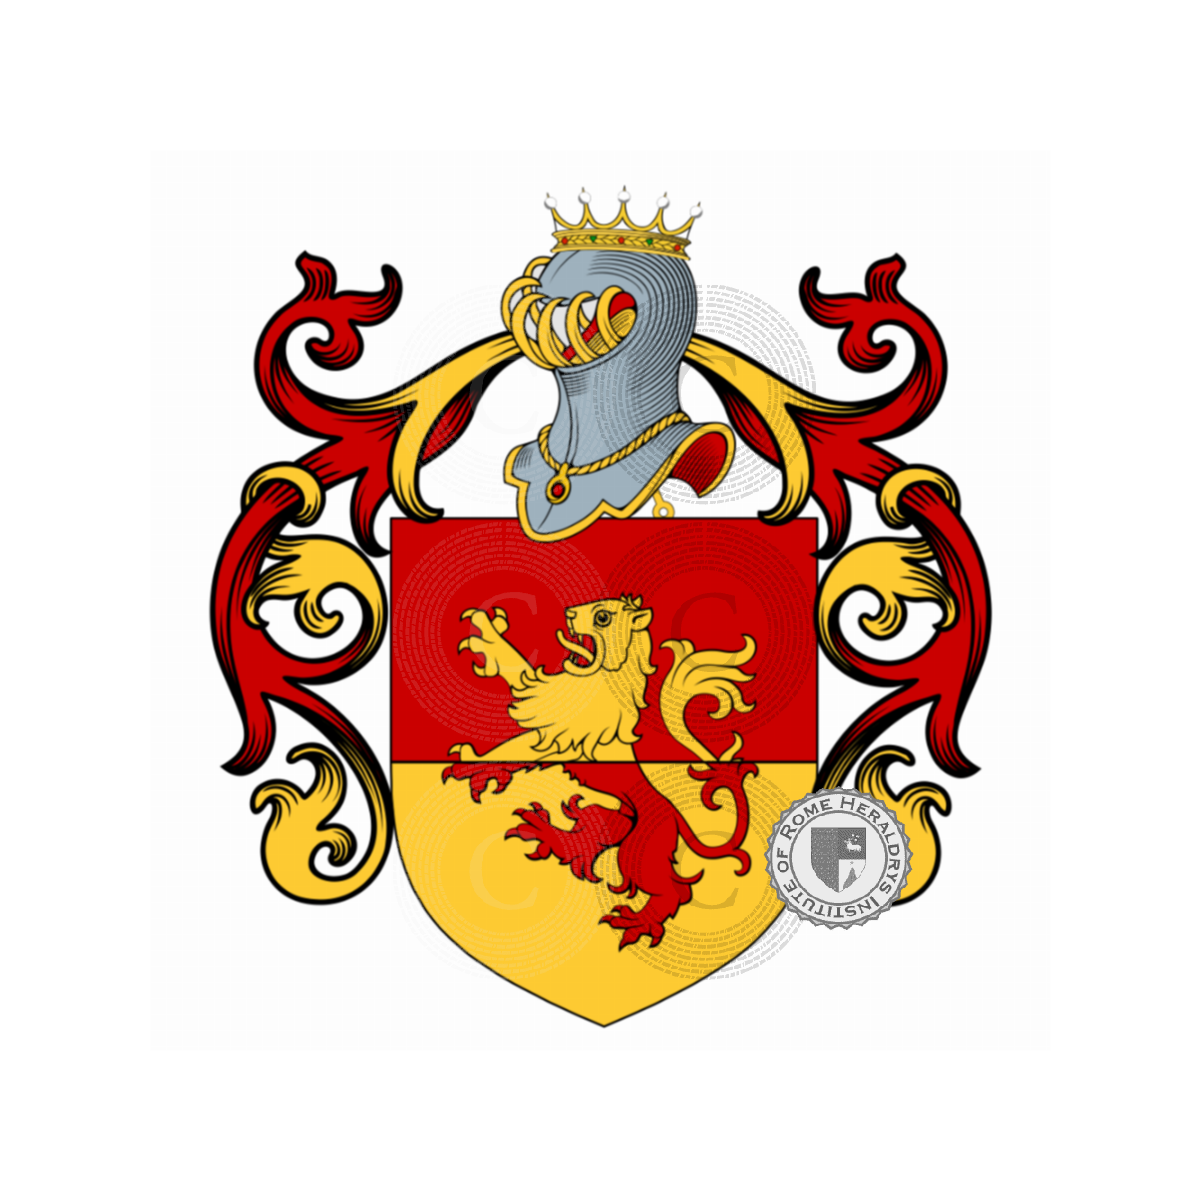 Del rosso Name Meaning, Family History, Family Crest & Coats of Arms